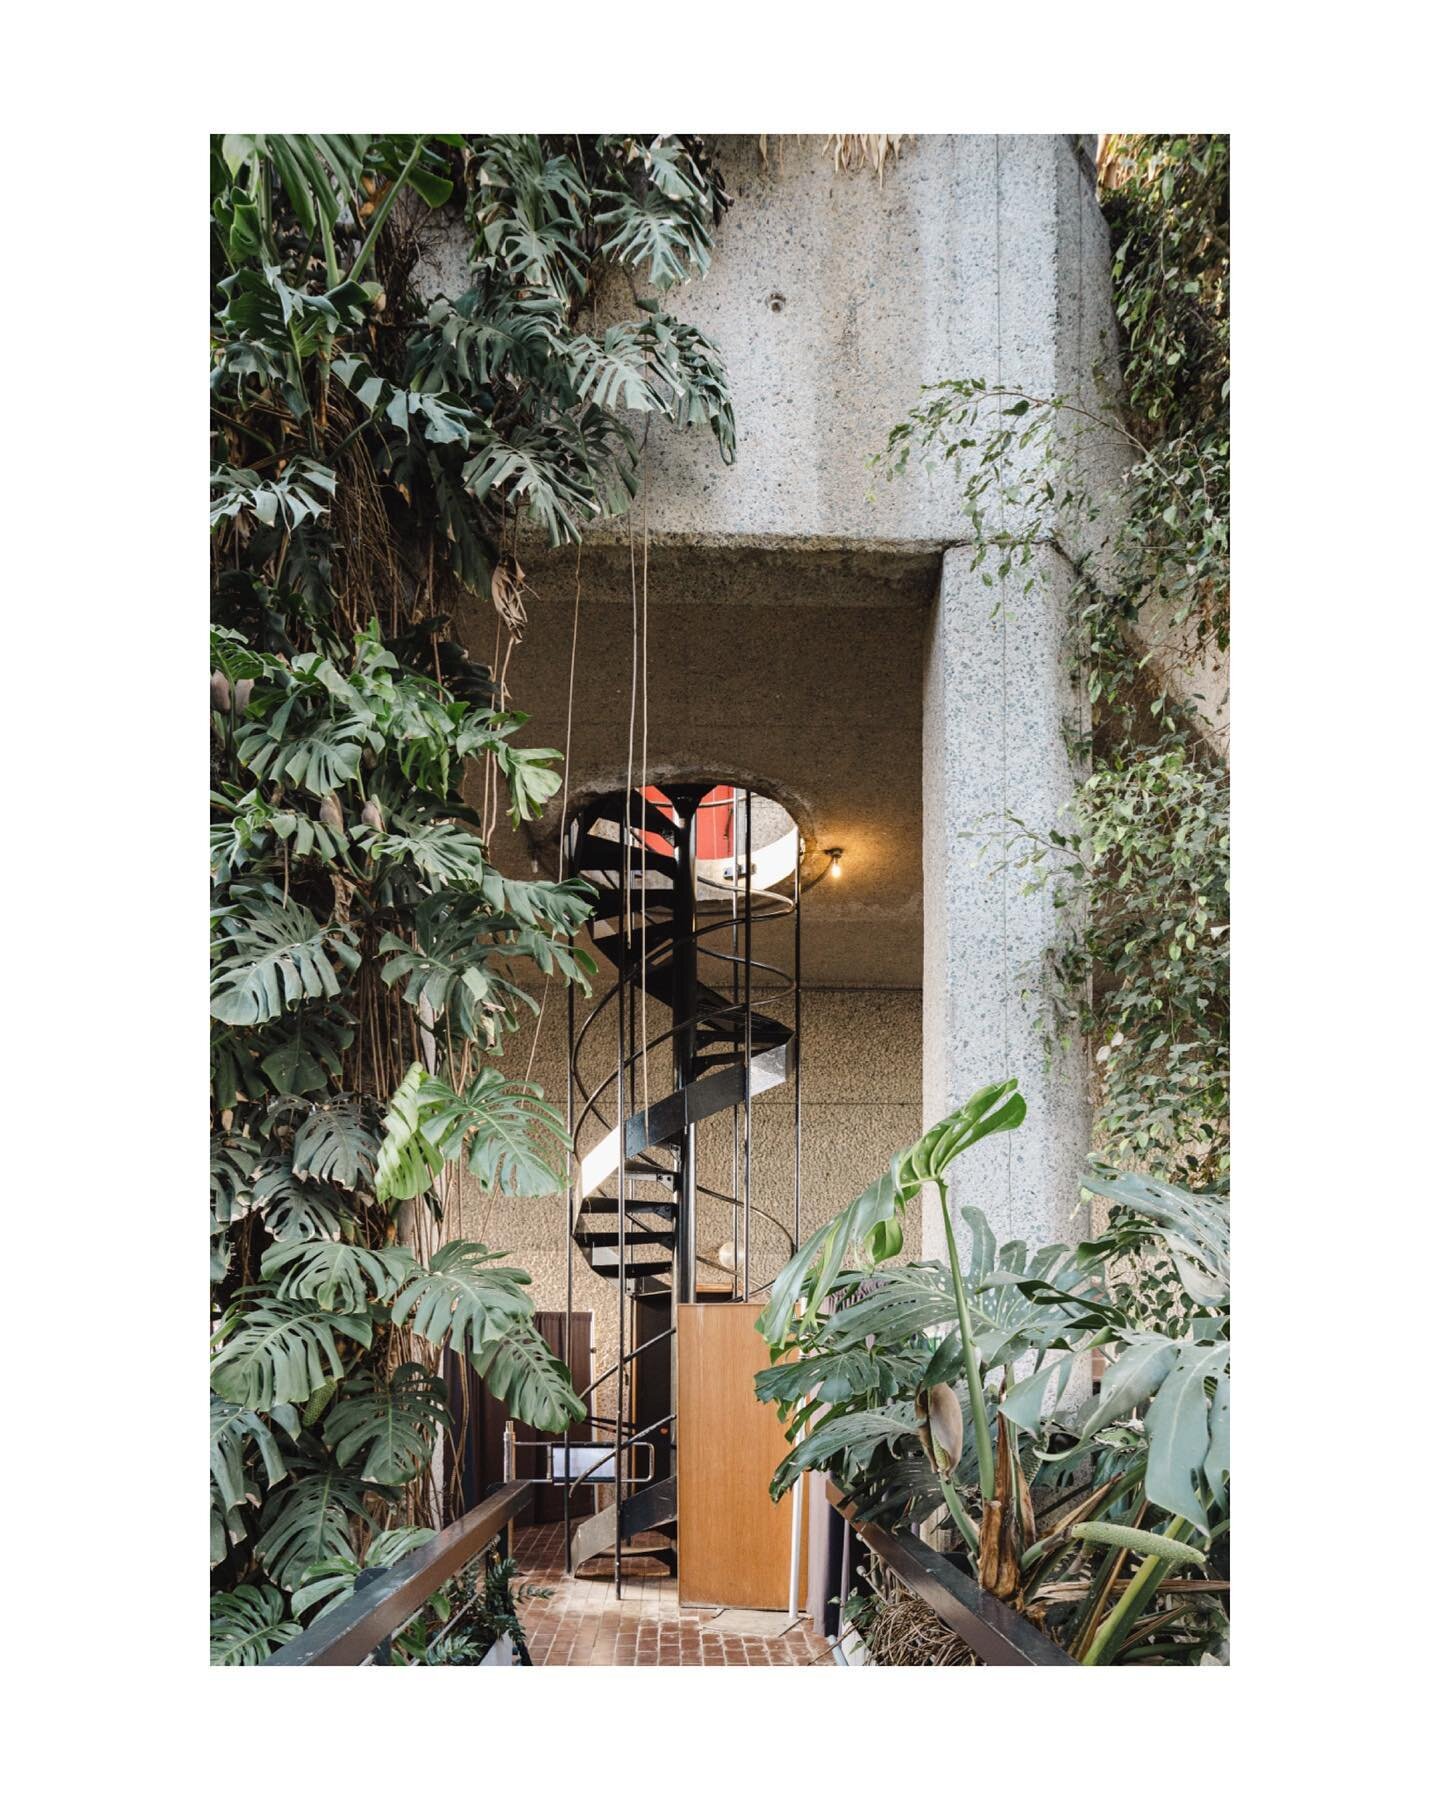 【Staircase to Honesty - Barbican Conservatory】

The Brutalist design throughout the Barbican is somewhat hidden by the lush dangling greenery in the first image, but why do we call it Brutalist?

The truth is not always enjoyable to hear and to be br